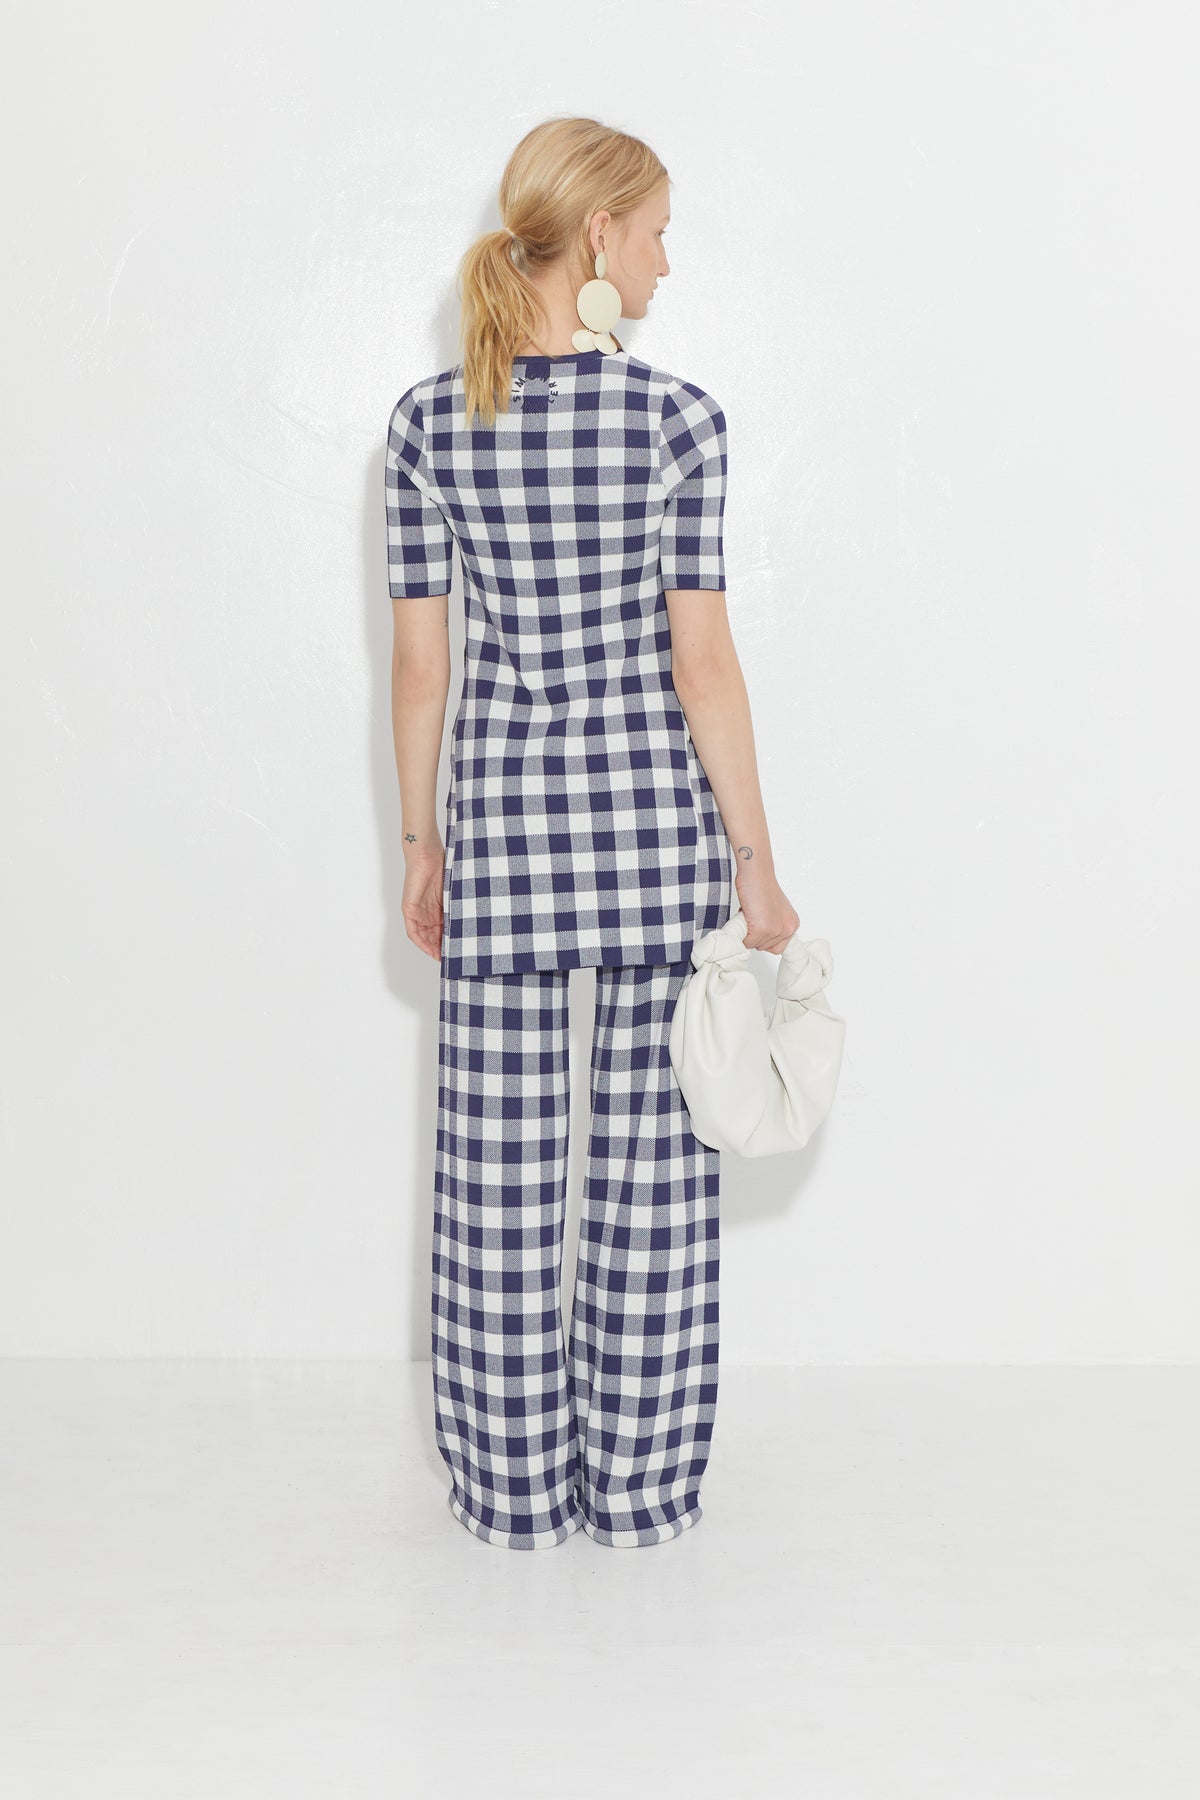 Knits By Jabber Pant in Ink Gingham